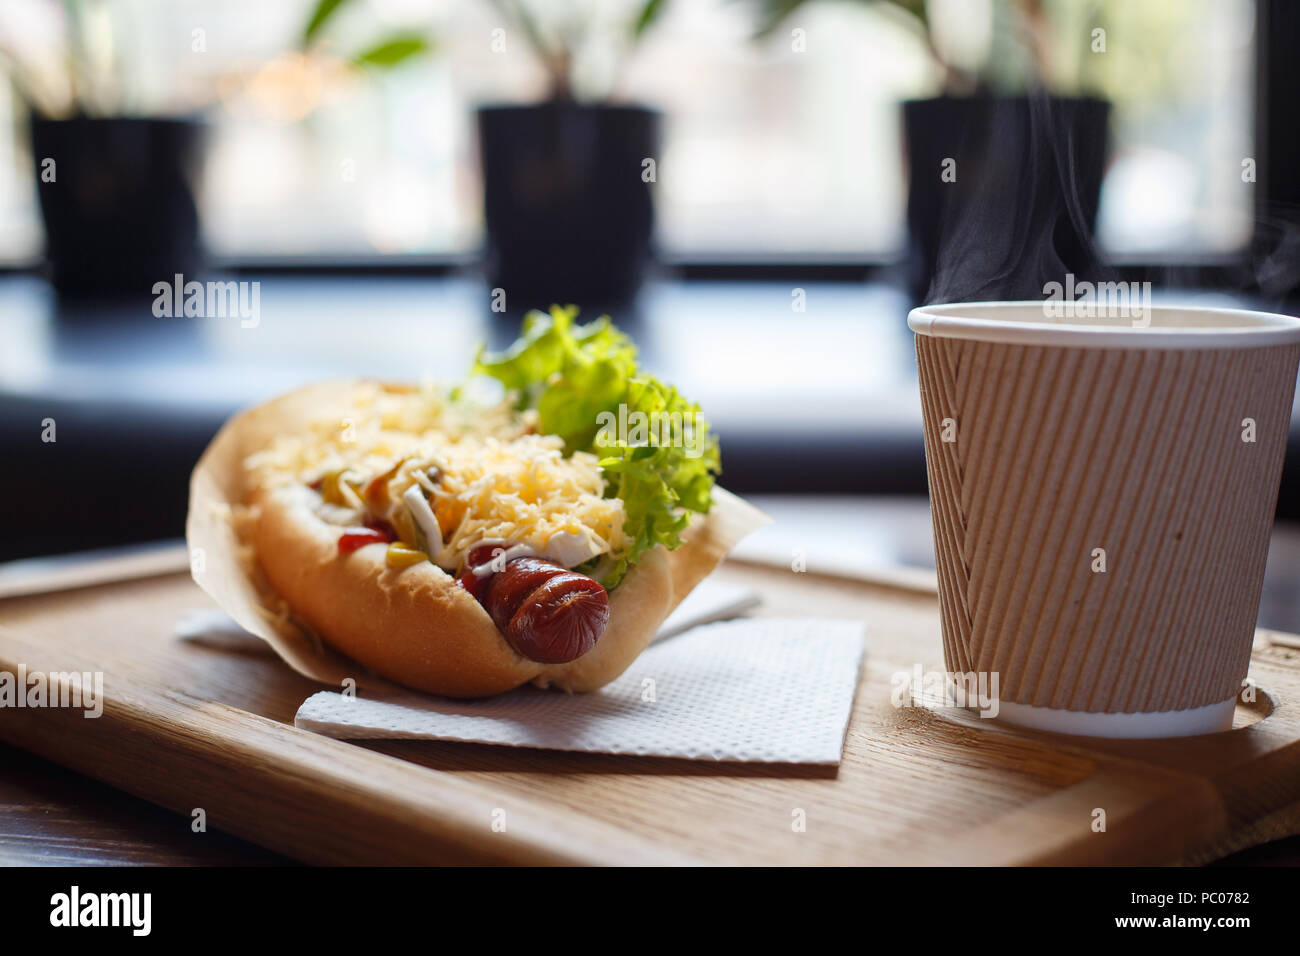 Hot dog with salad and cup of coffee on the table Stock Photo